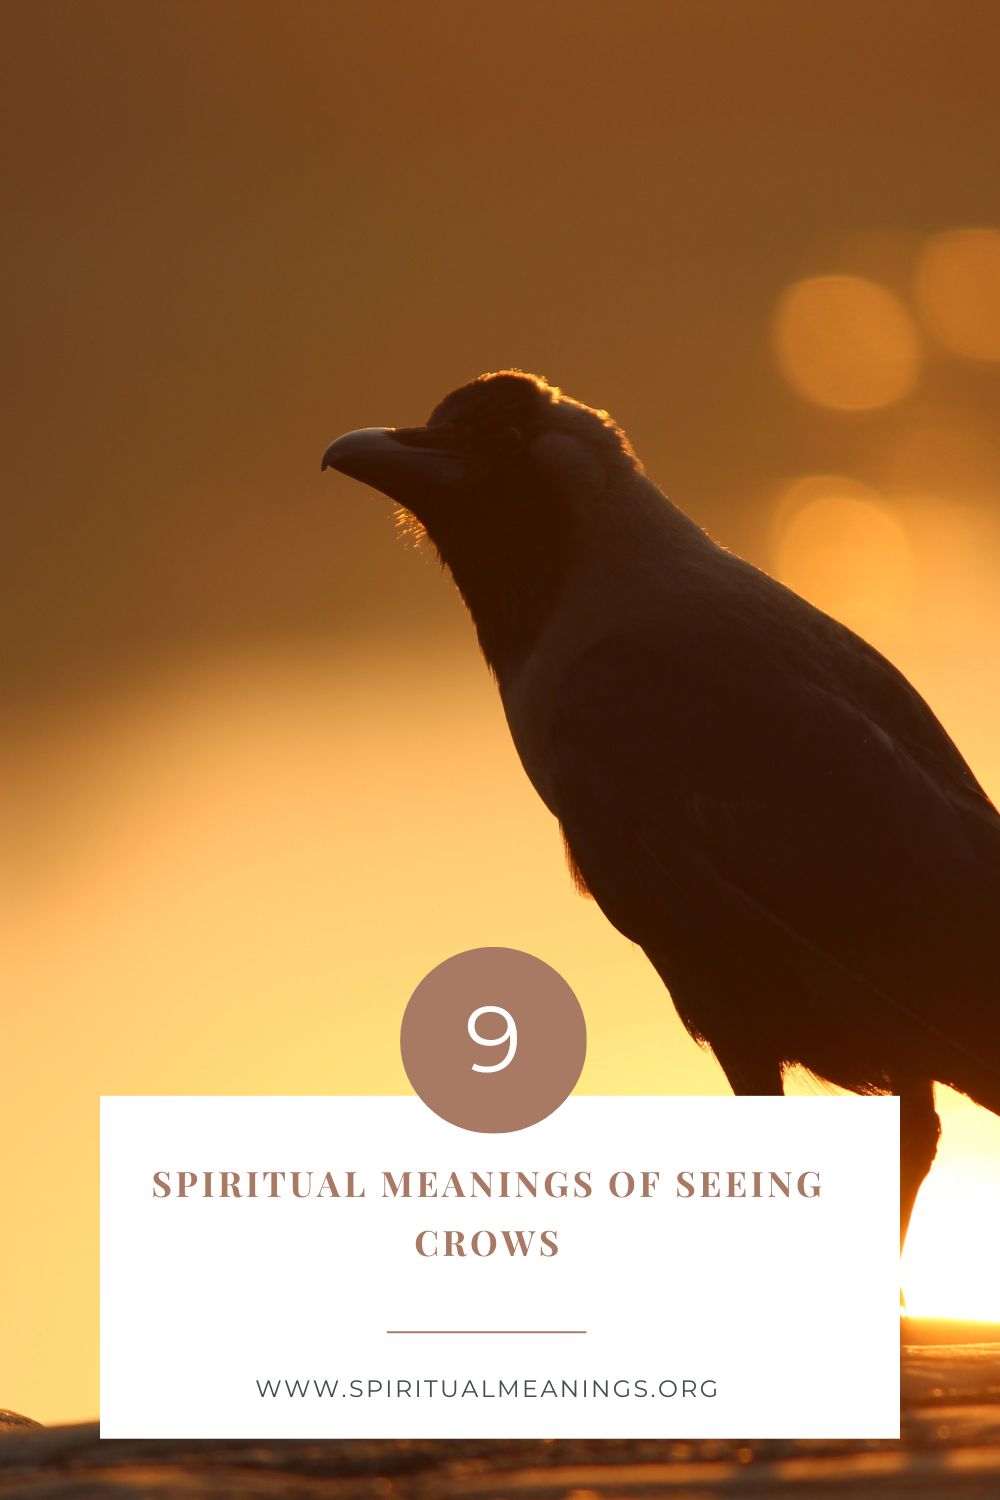 Spiritual Meanings of Seeing Crows